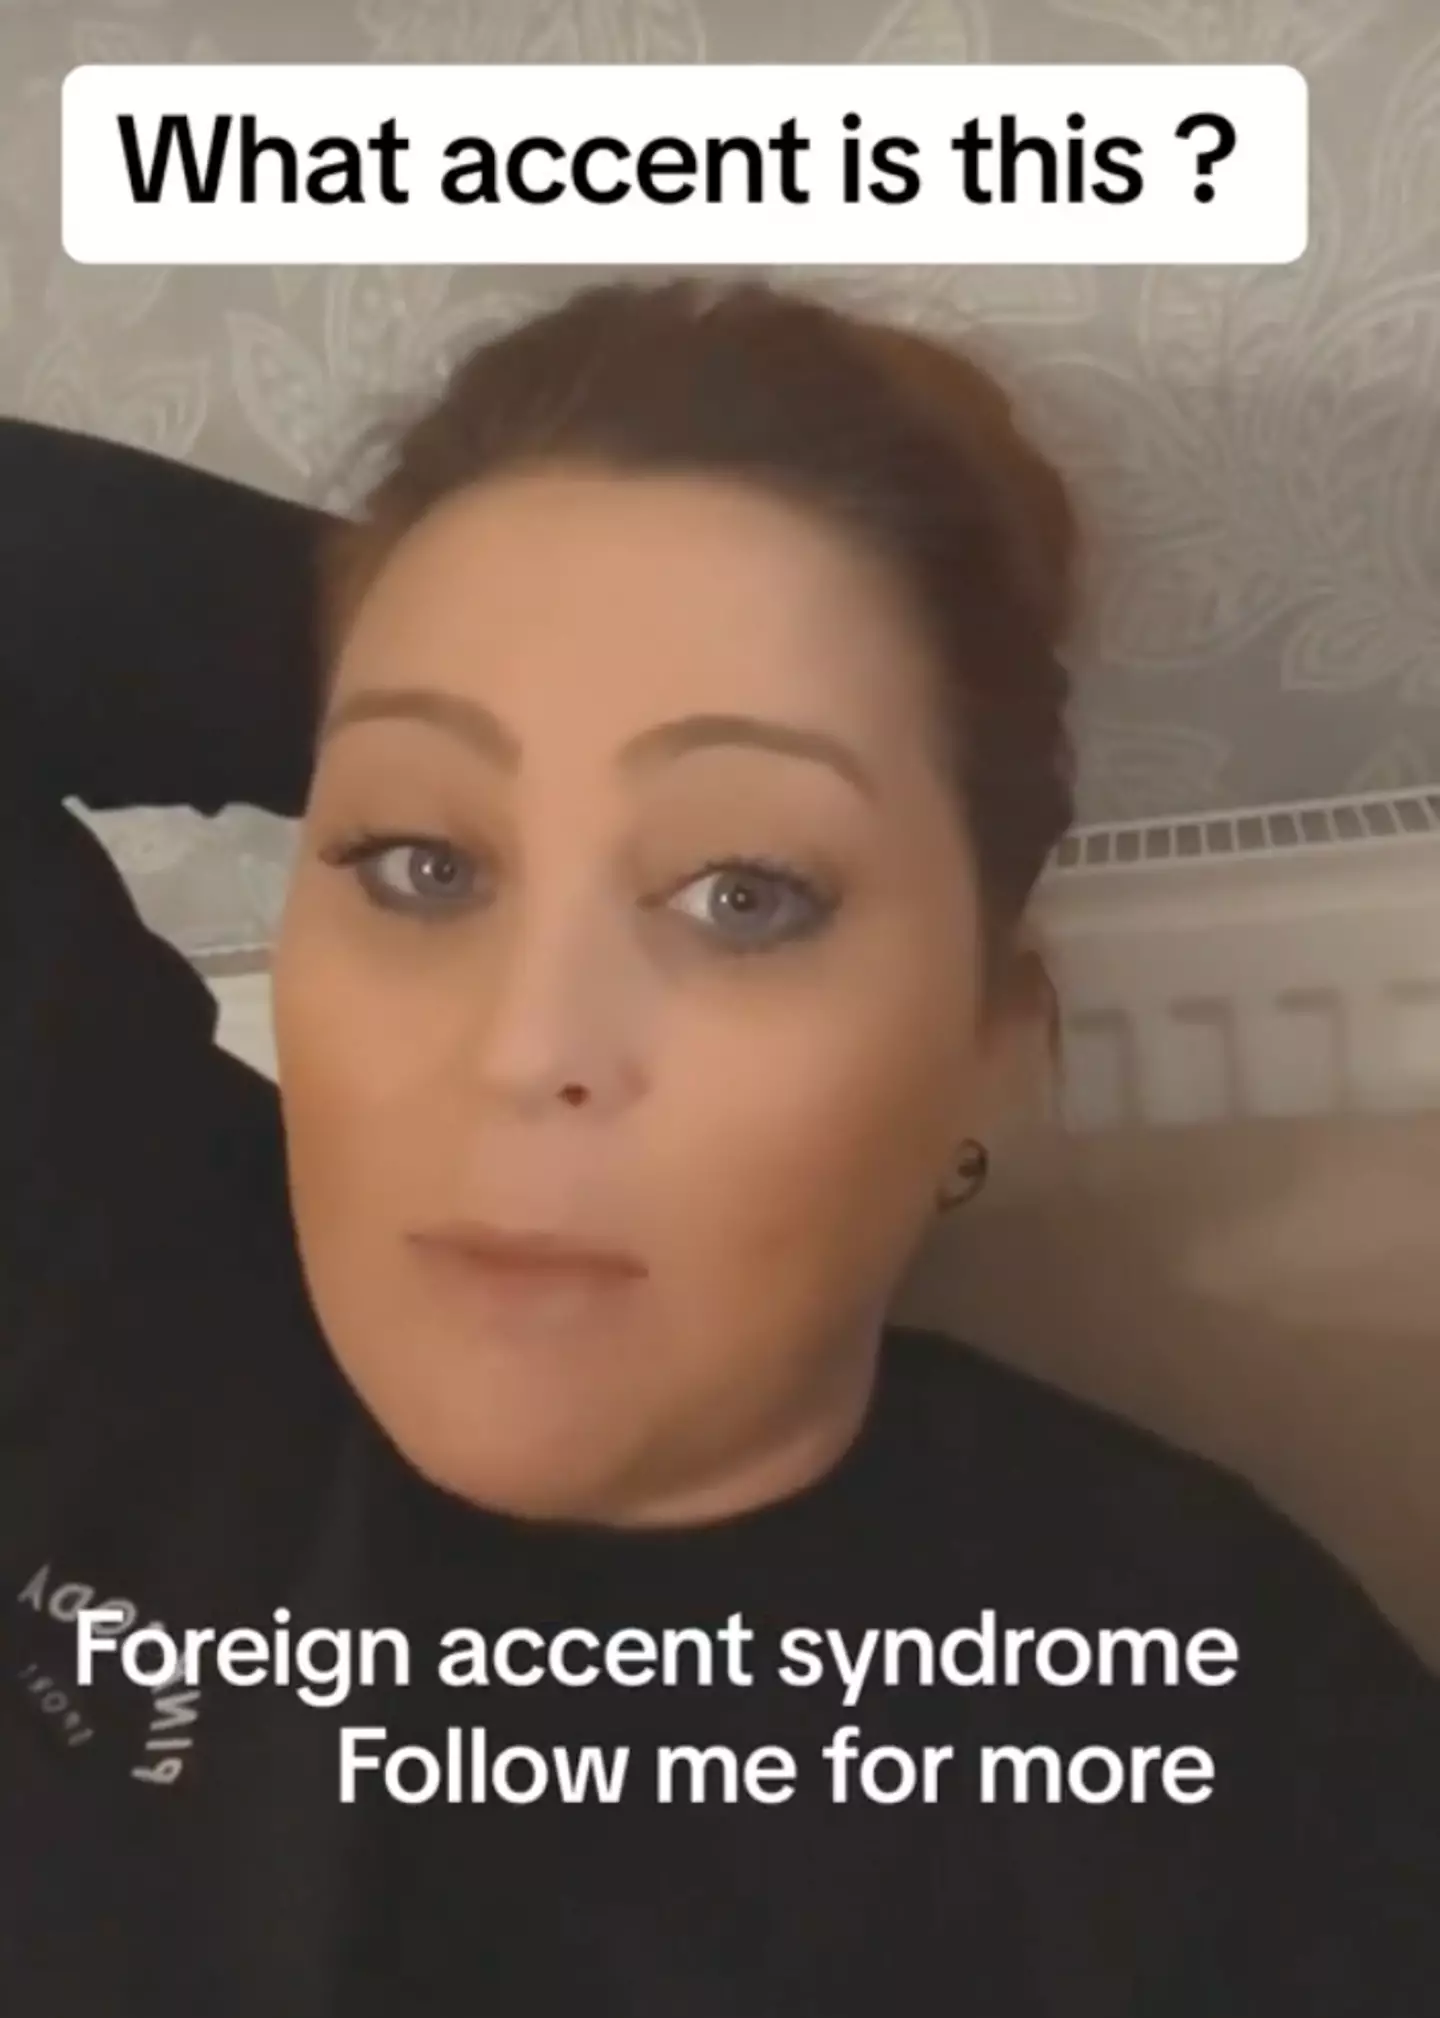 She believes it's to do with Foreign Accent Syndrome.